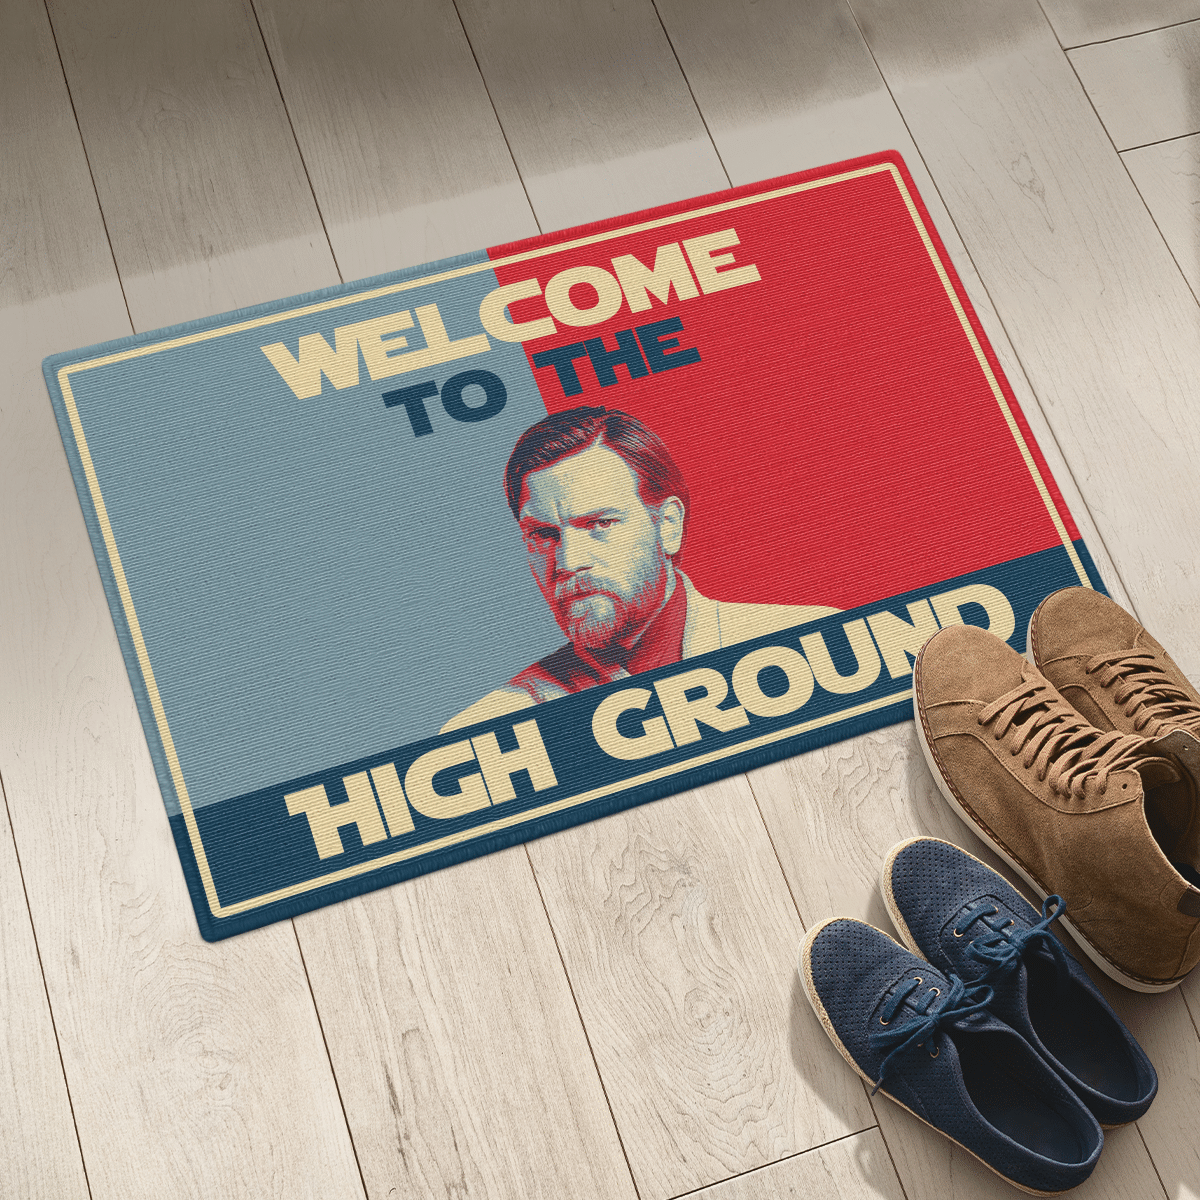 Welcome to the high ground doormat 2